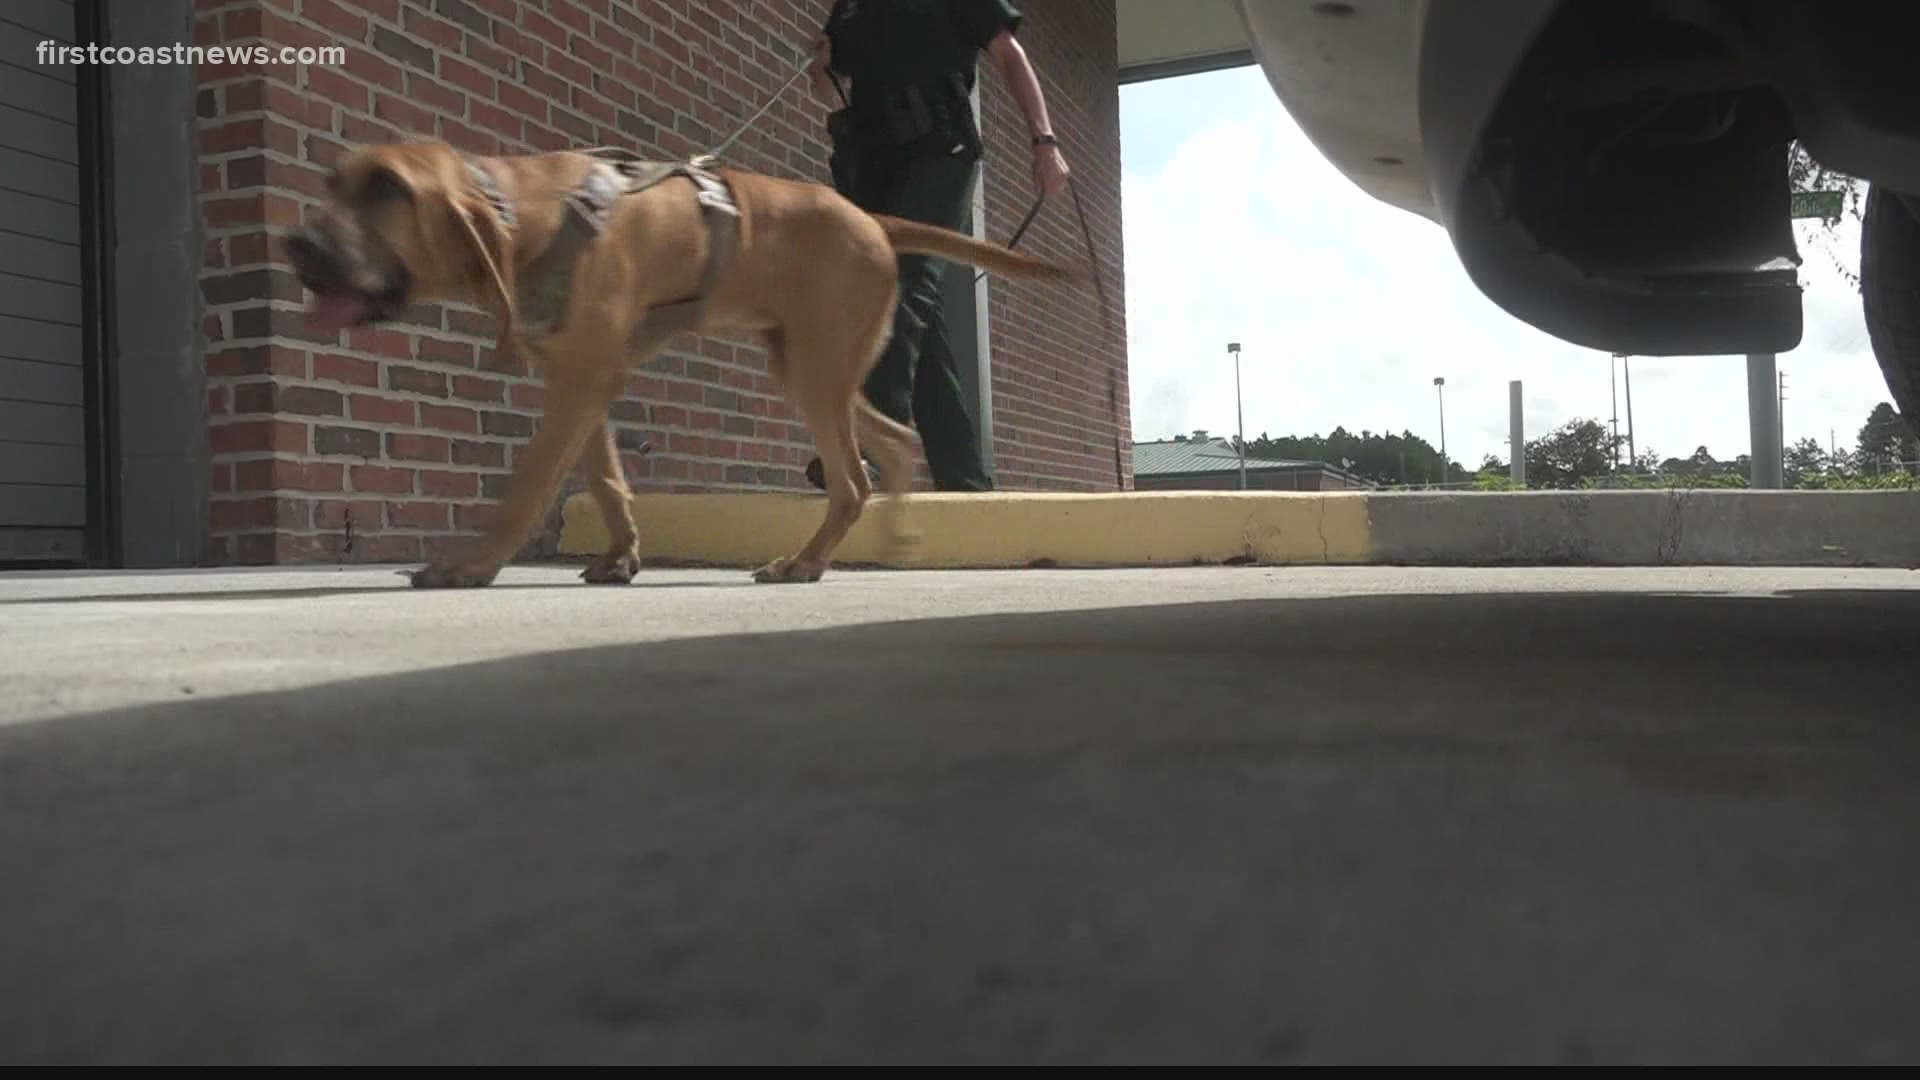 Nassau County made history with its first female K-9 handler in the sheriff's office.